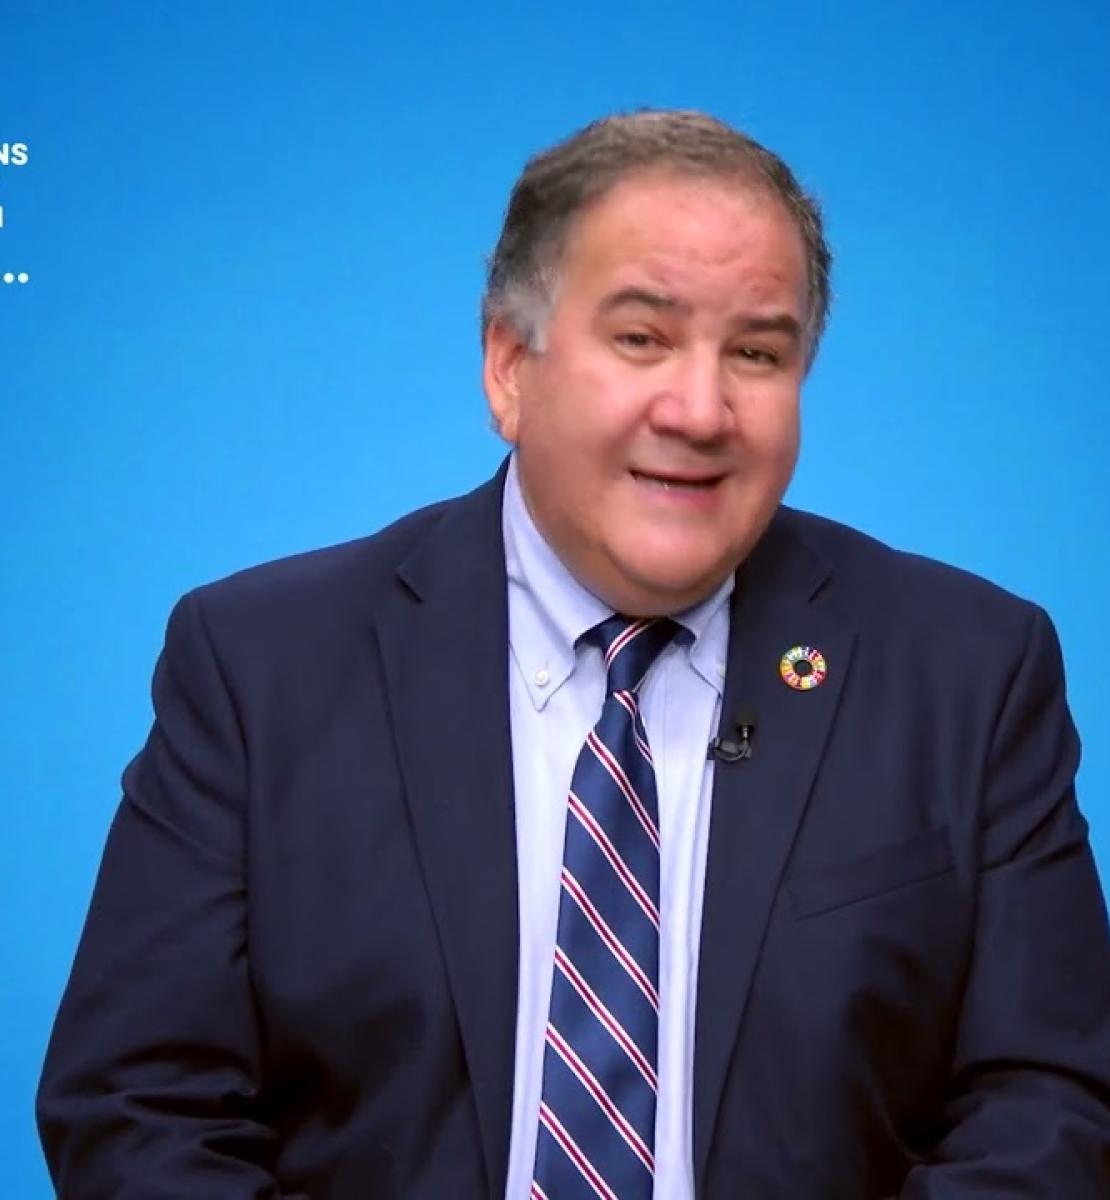 Screenshot from video message shows Resident Coordinator in Guatemala, Jose Miguel Barreto